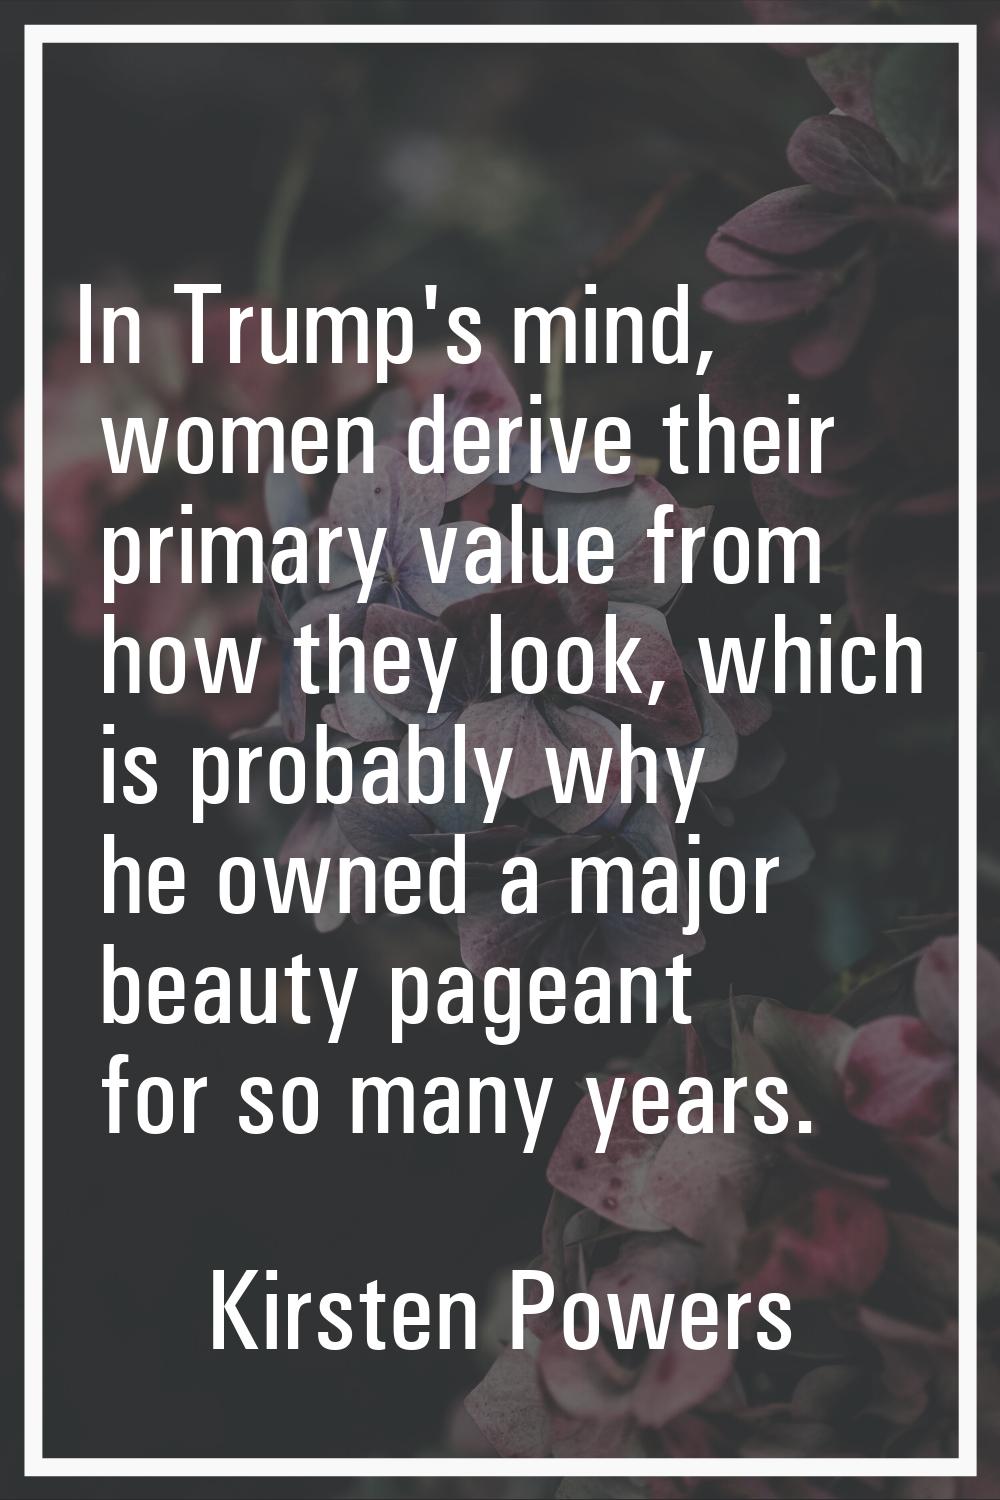 In Trump's mind, women derive their primary value from how they look, which is probably why he owne